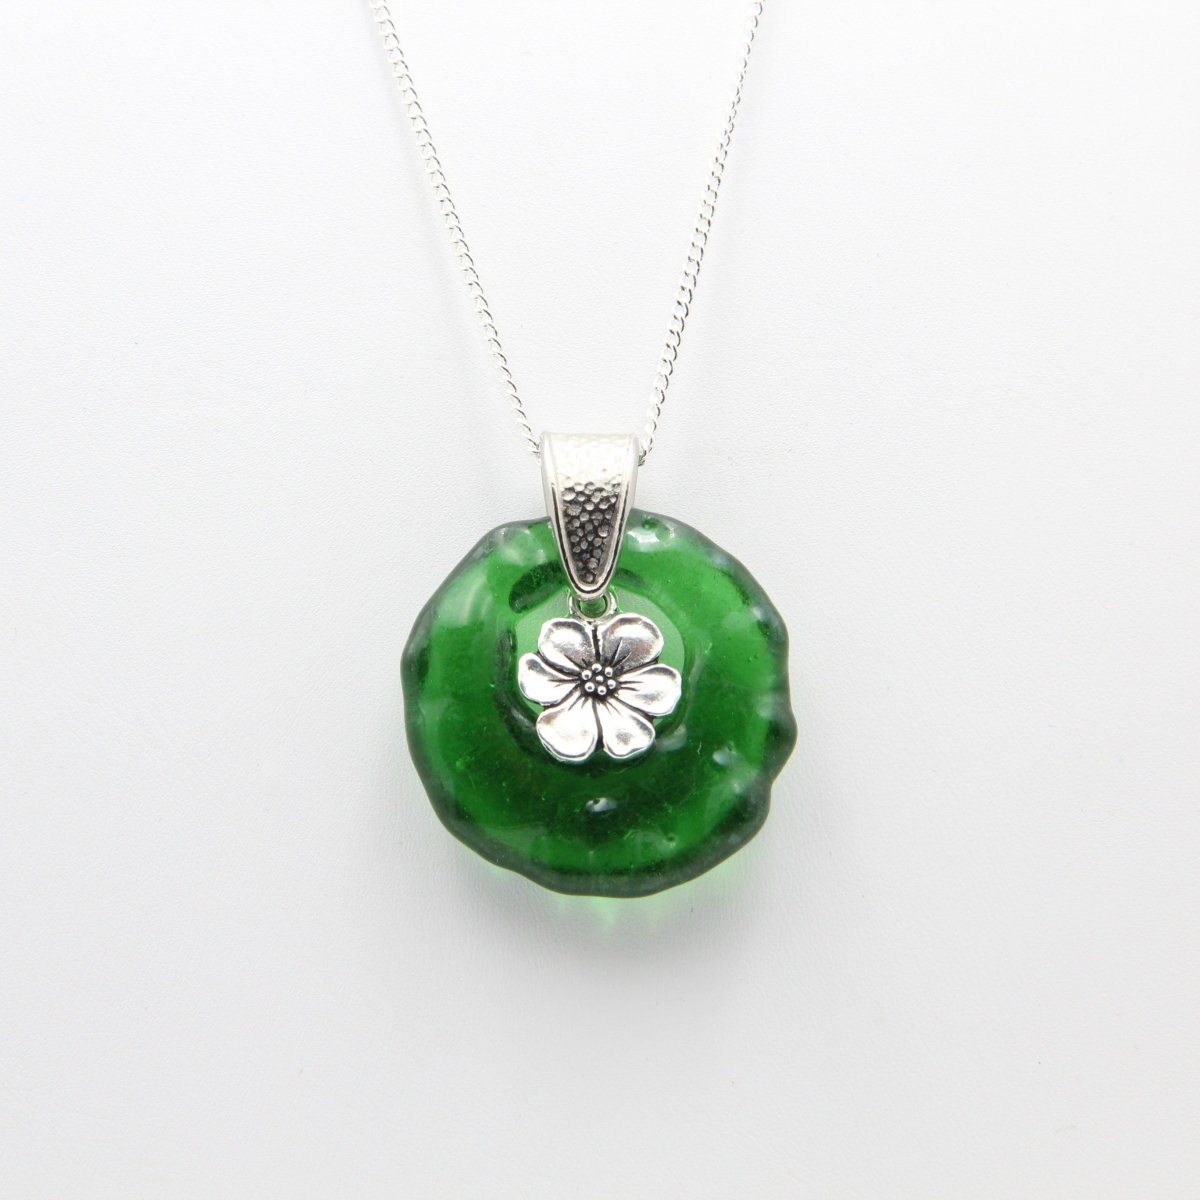 Upcycled Green Donut Necklace, Recycled Wine Bottle Glass Pendant with Flower Charm